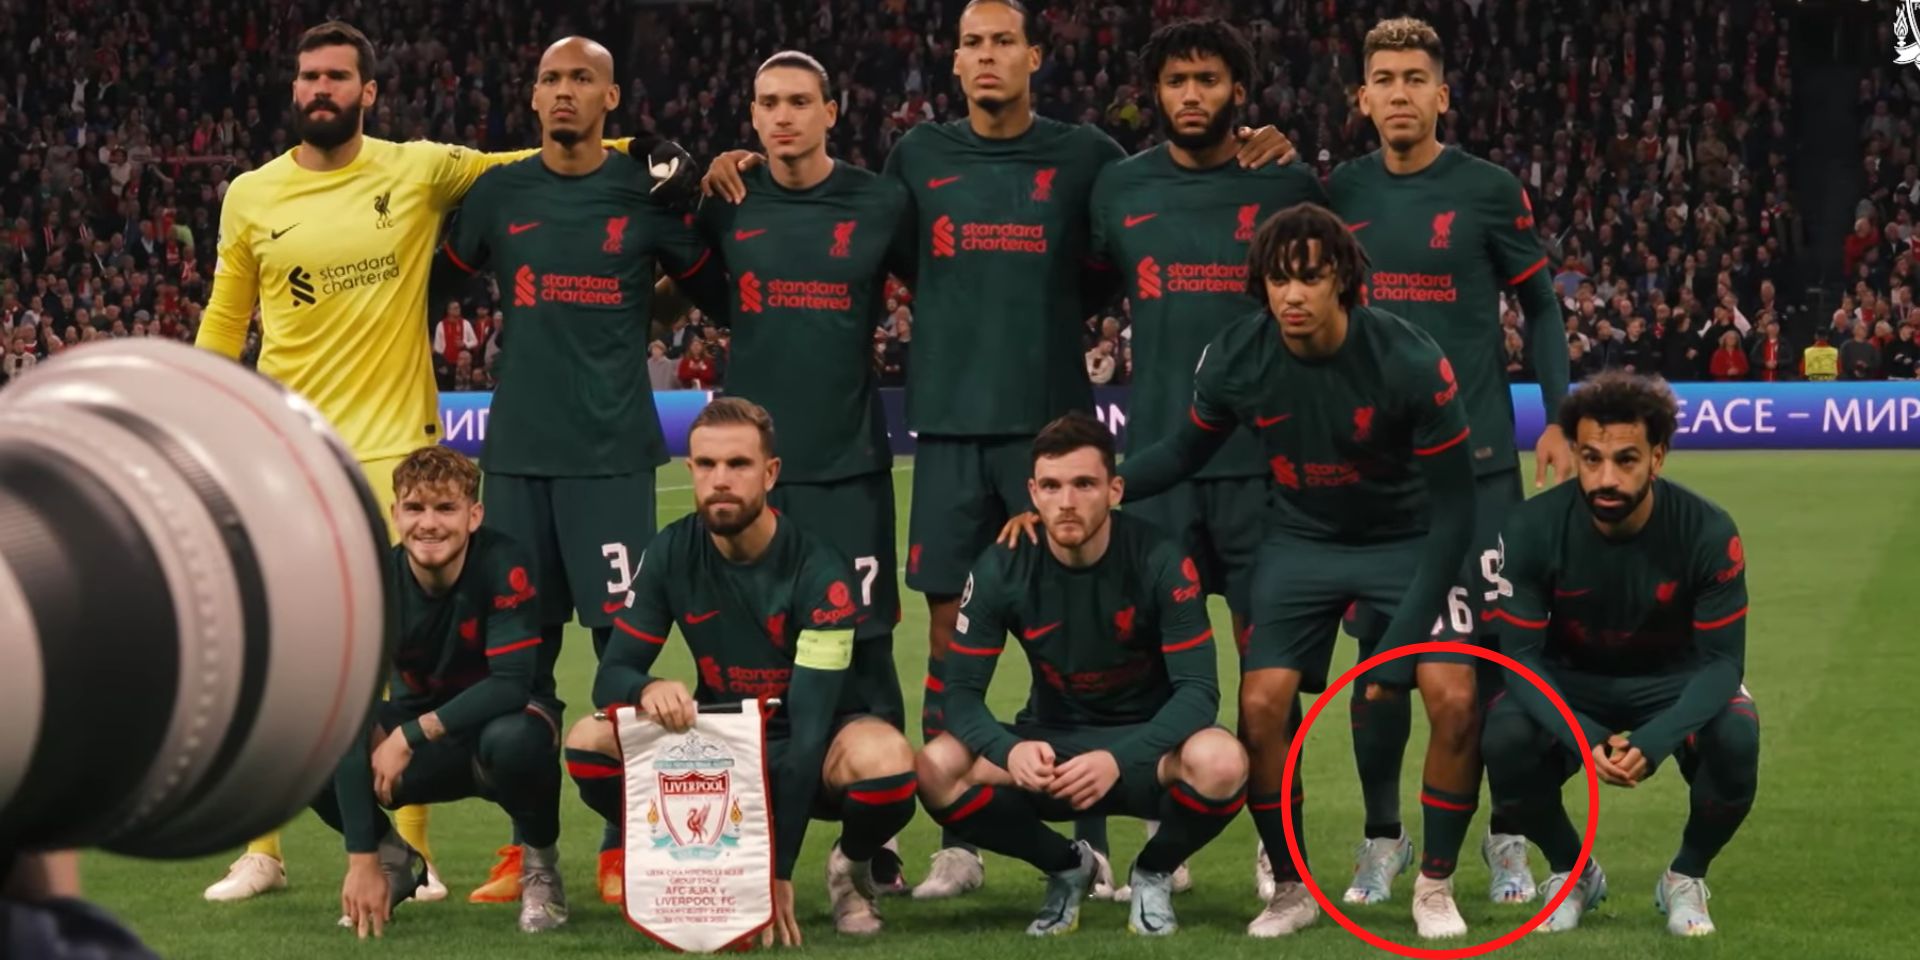 (Video) Hilarious moment Firmino goes on tiptoes to look taller in squad picture